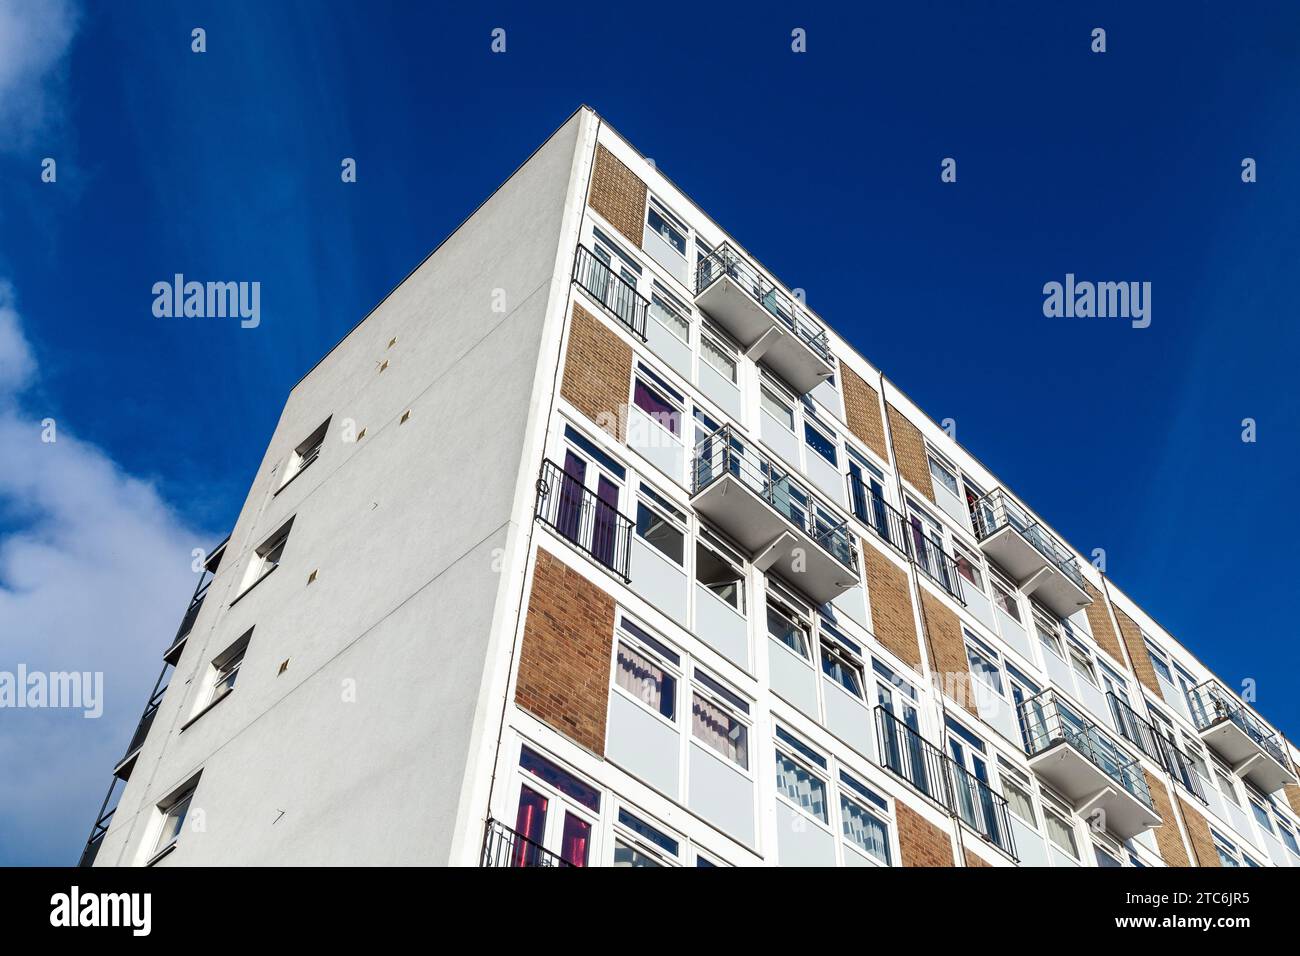 Wentworth Mews council housing block in Mile End, London, England Stock Photo